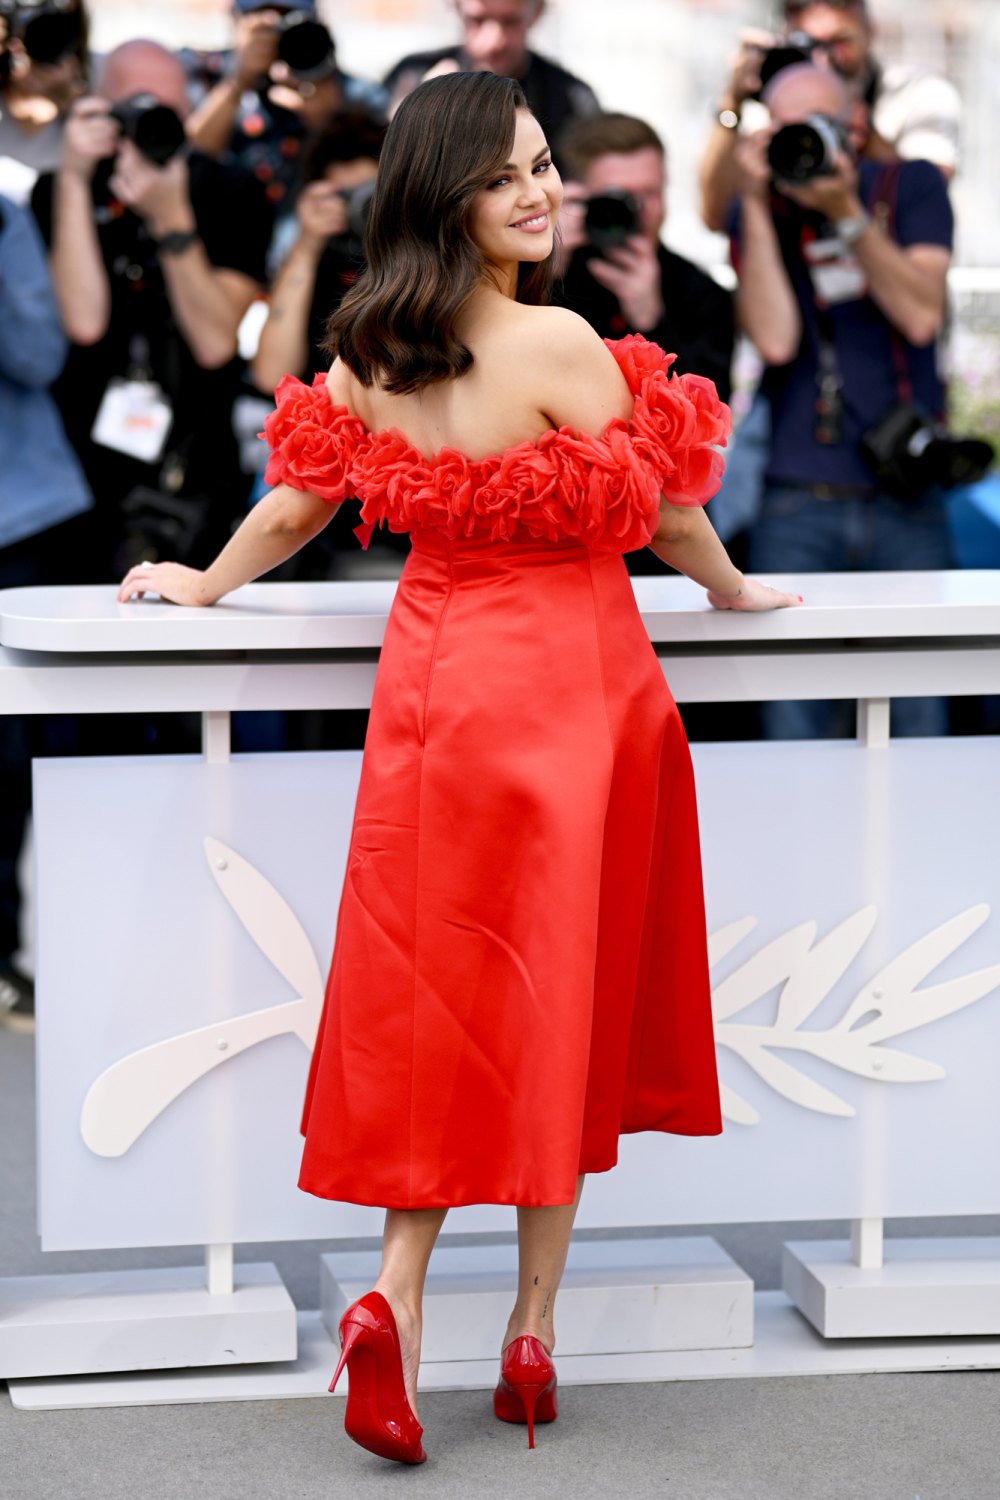 Selena Gomez Adds a Pop of Color at the Cannes Film Festival